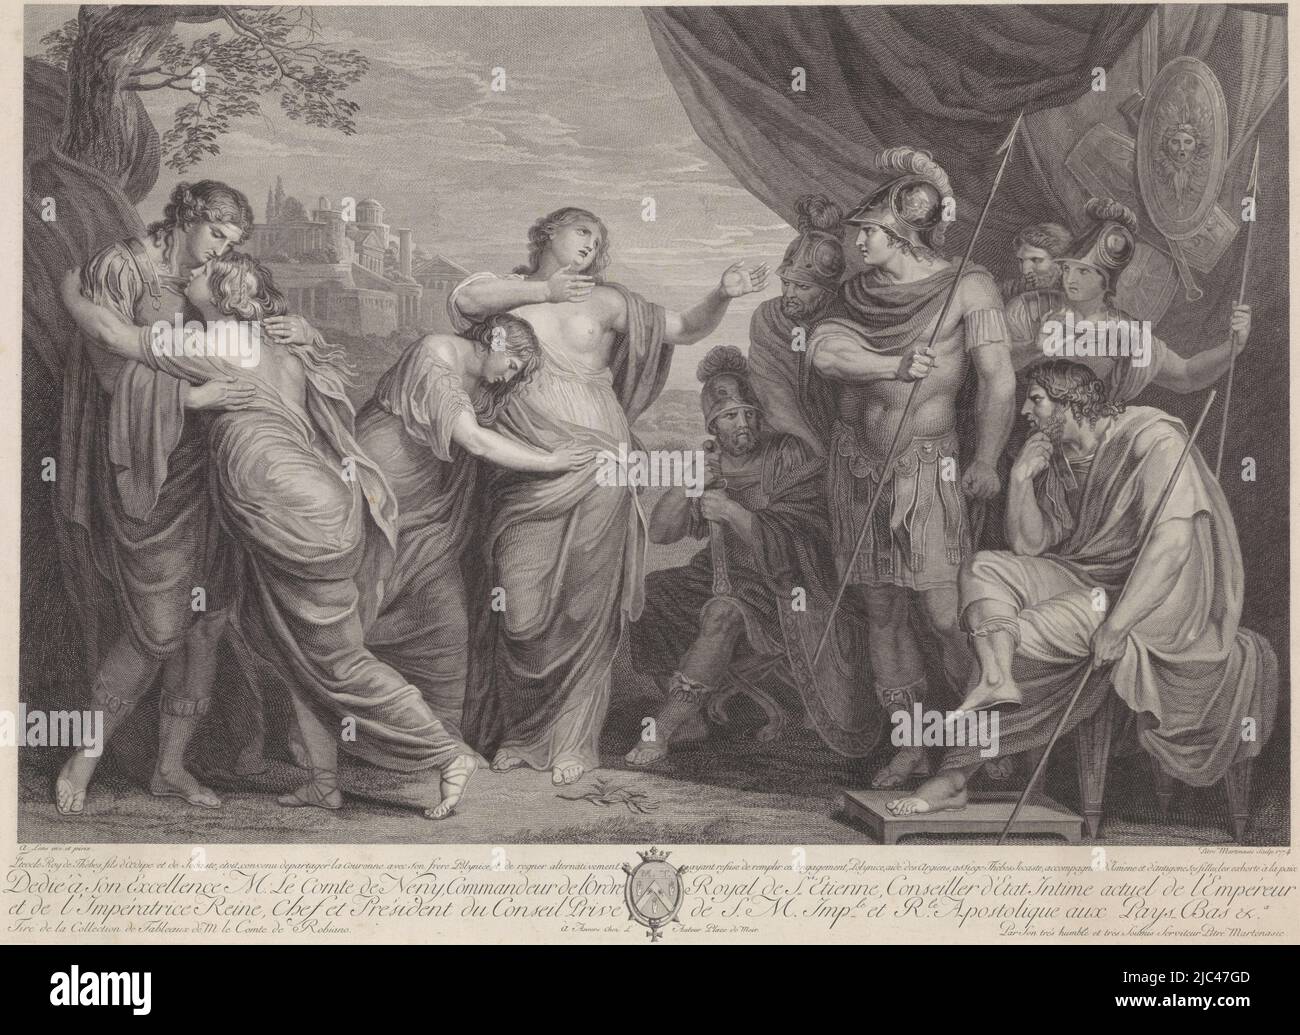 Jocaste, arms spread, accompanied by her daughters Antigone and Ismene, begs Eteocles and Polynices for peace. On the right Polynices wearing a helmet and holding a spear in his right hand. Left Eteocles., Eteocles and Polynices, exhorted to peace by their mother Jocaste., print maker: Pieter Franciscus Martenasie, (mentioned on object), after: Andries Lens, (mentioned on object), publisher: Pieter Franciscus Martenasie, (mentioned on object), Antwerp, 1774, paper, etching, engraving, h 428 mm × w 590 mm Stock Photo